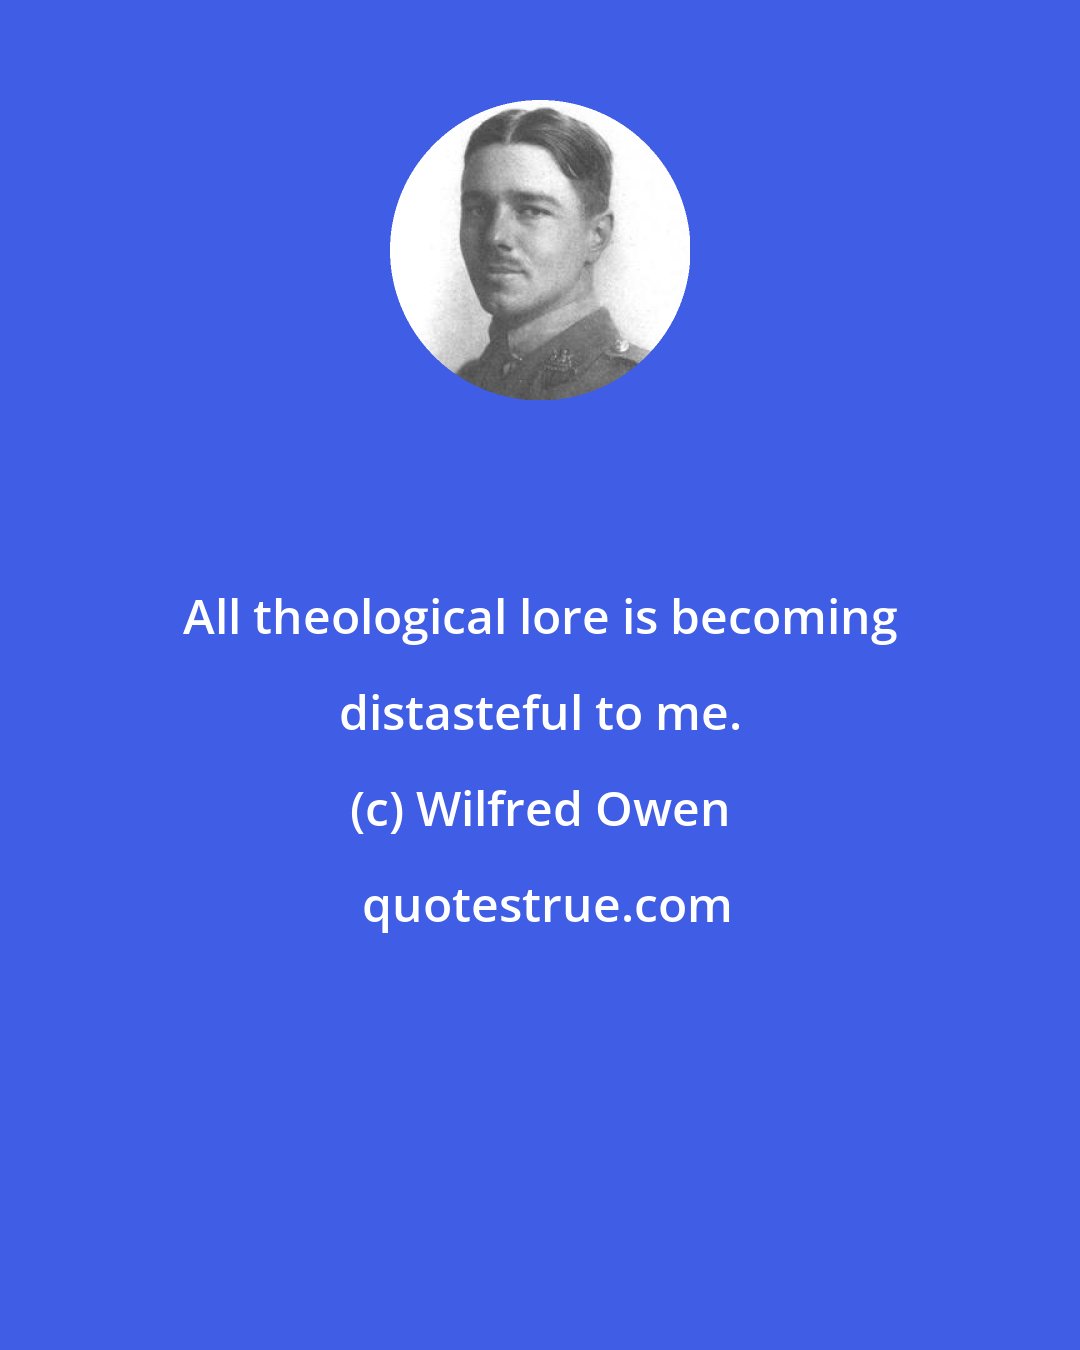 Wilfred Owen: All theological lore is becoming distasteful to me.